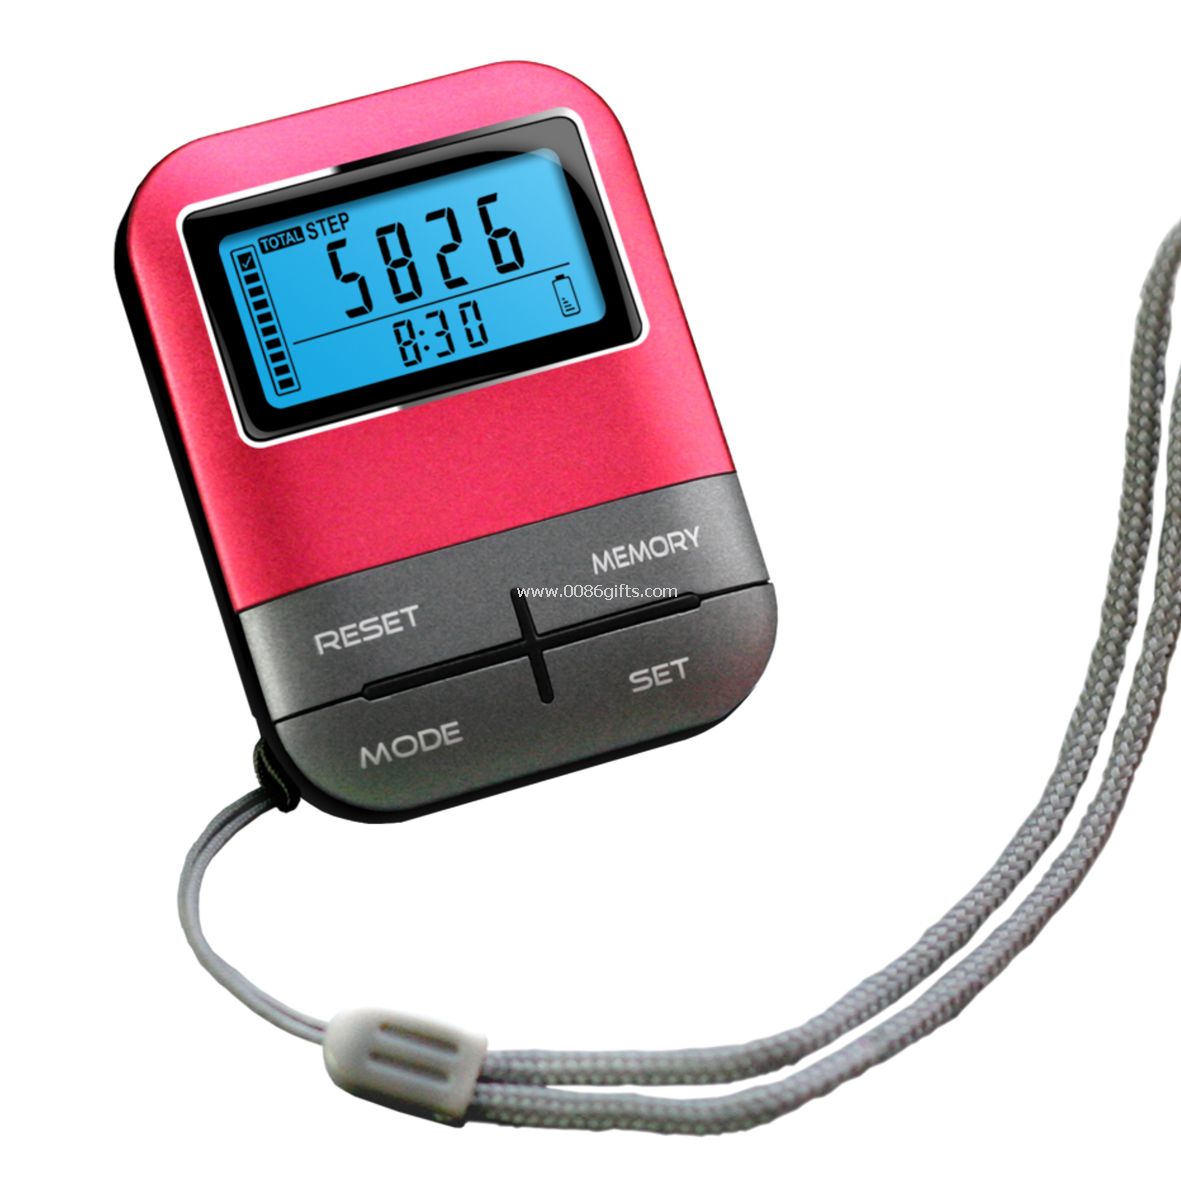 Rechargeable USB pedometer with backlight